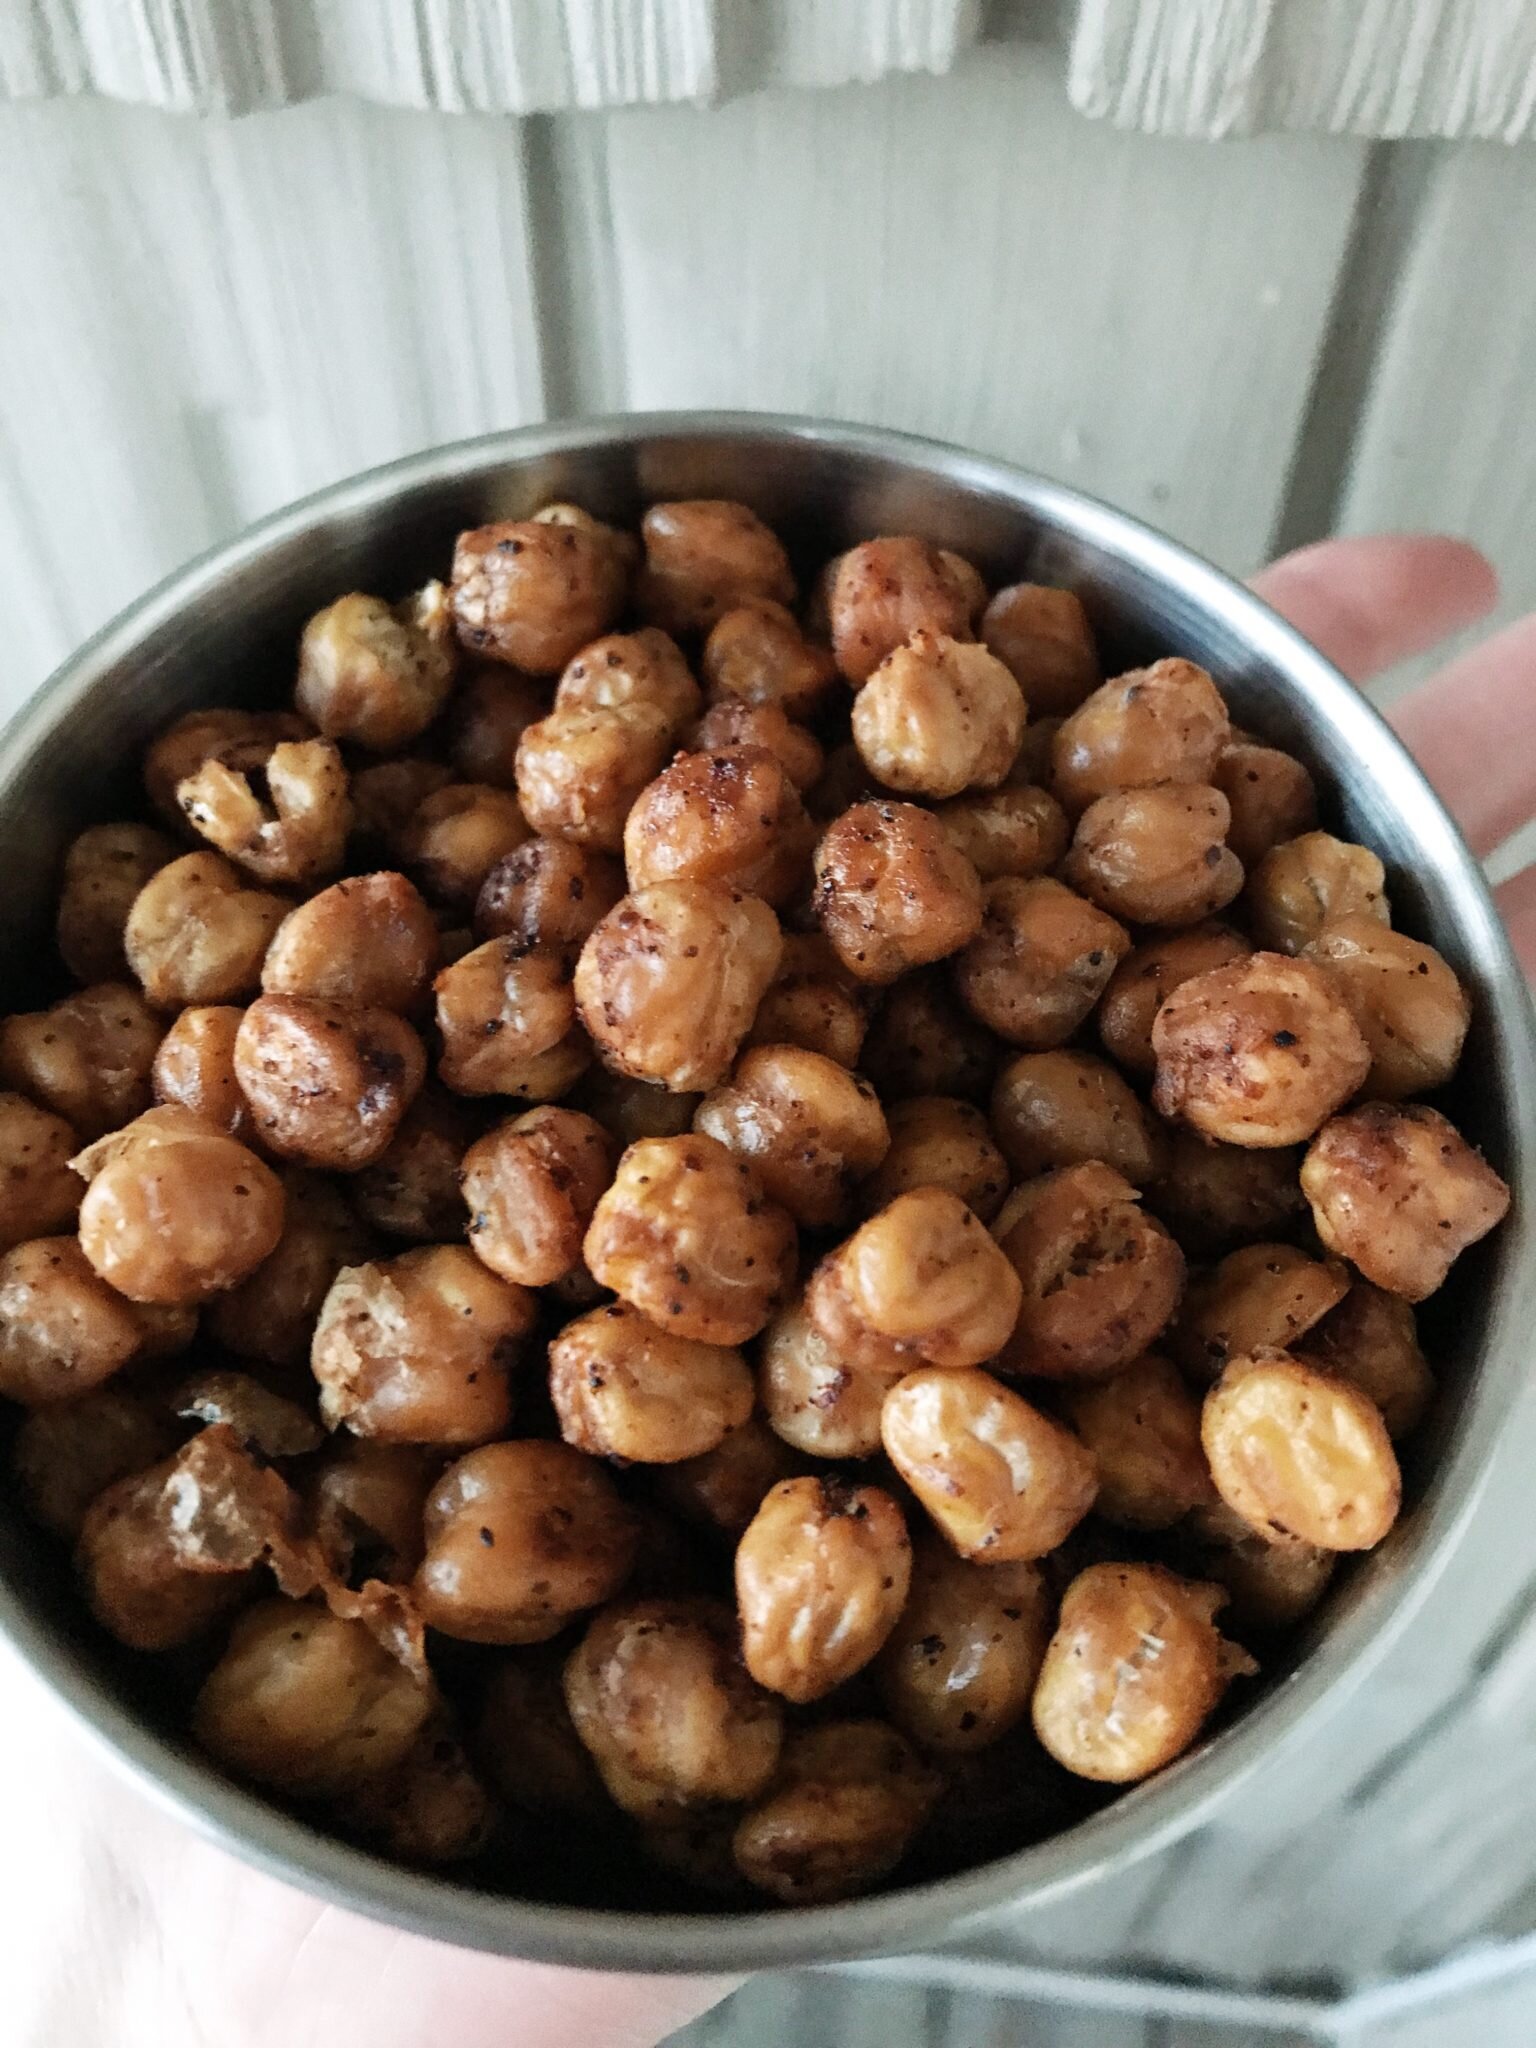 Protein snack 5: Roasted chickpeas - These are a great vegetarian option! And best enjoyed with a cold beverage like iced tea, flavored water or la croix. You won’t miss the chips!1 can of chickpeas- rinsed and drainedDry with a paper towelDrizzle 1 tablespoon of olive/avocado/coconut oil and toss chickpeasSprinkle seasonings of choice- my go to: ancho pepper, chipotle and garlic. Some other ideas are barbecue or cinnamon and nutmeg!Roast in the oven on 300 degrees for about 1.5 hours or until very firm and crunchy!Store at room temp with a paper towel in the bag to absorb moisture.